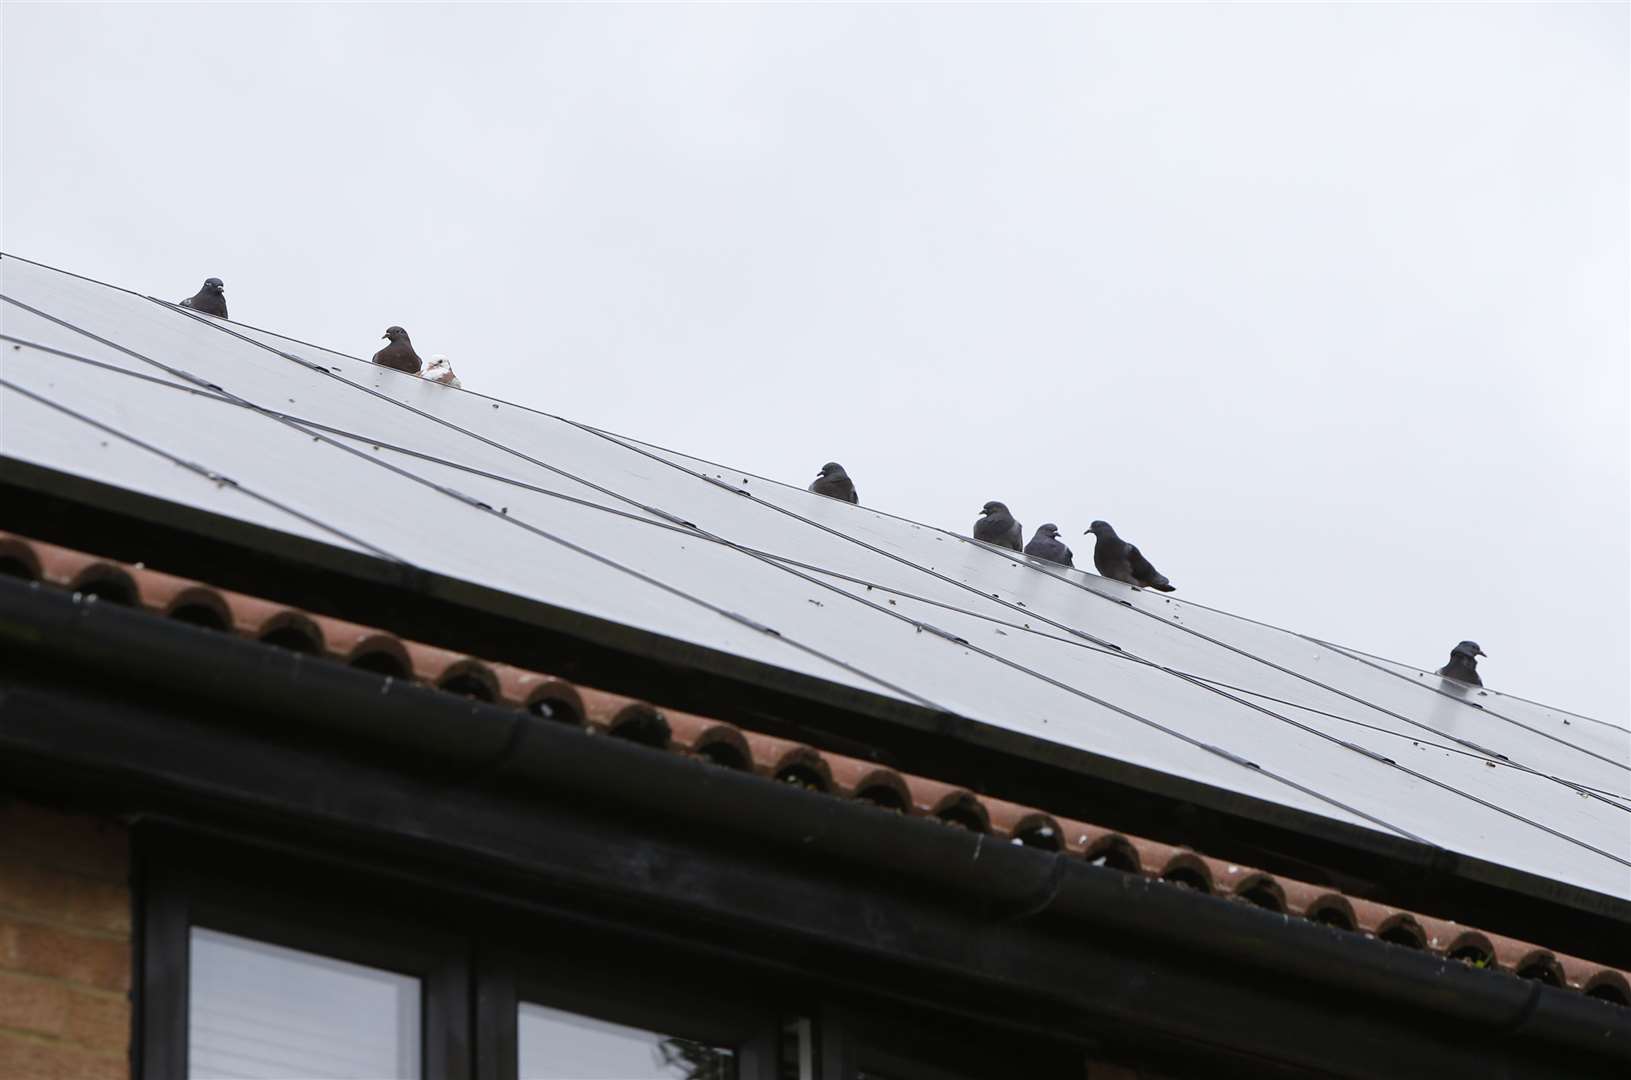 Residents say pigeons have started nesting on the houses after trees were taken down